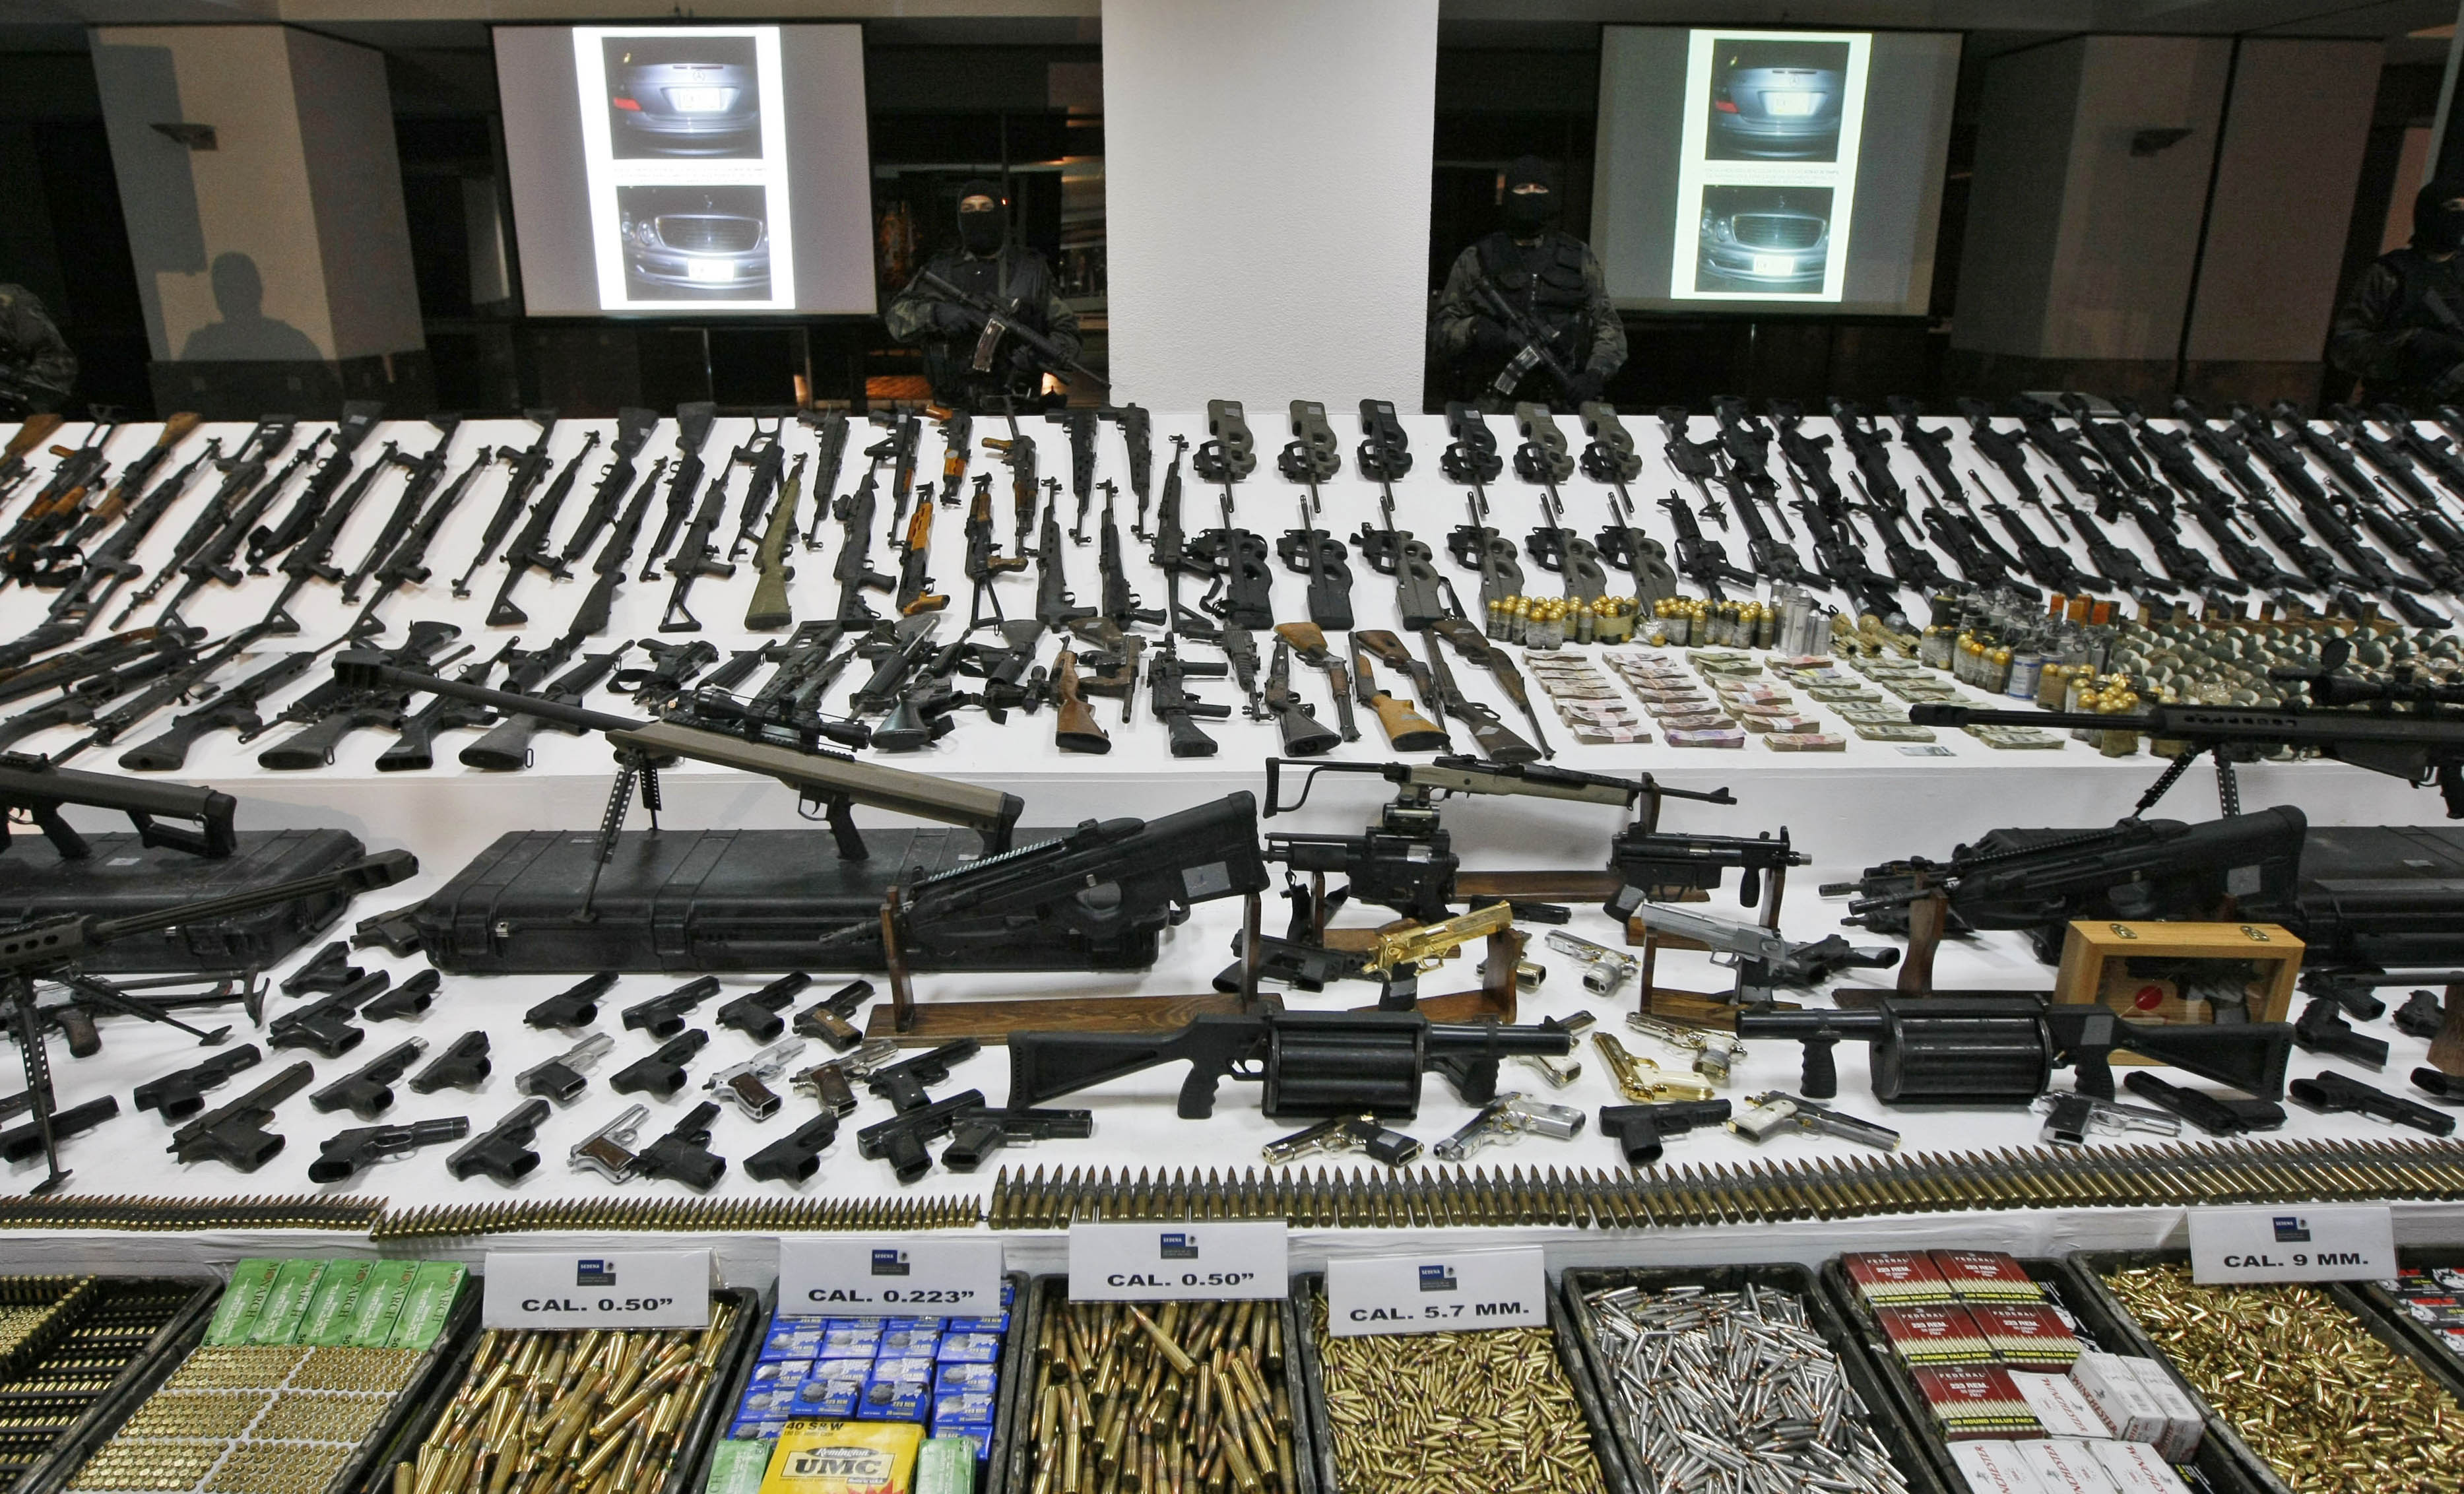 A variety of firearms seized by Mexican authorities.